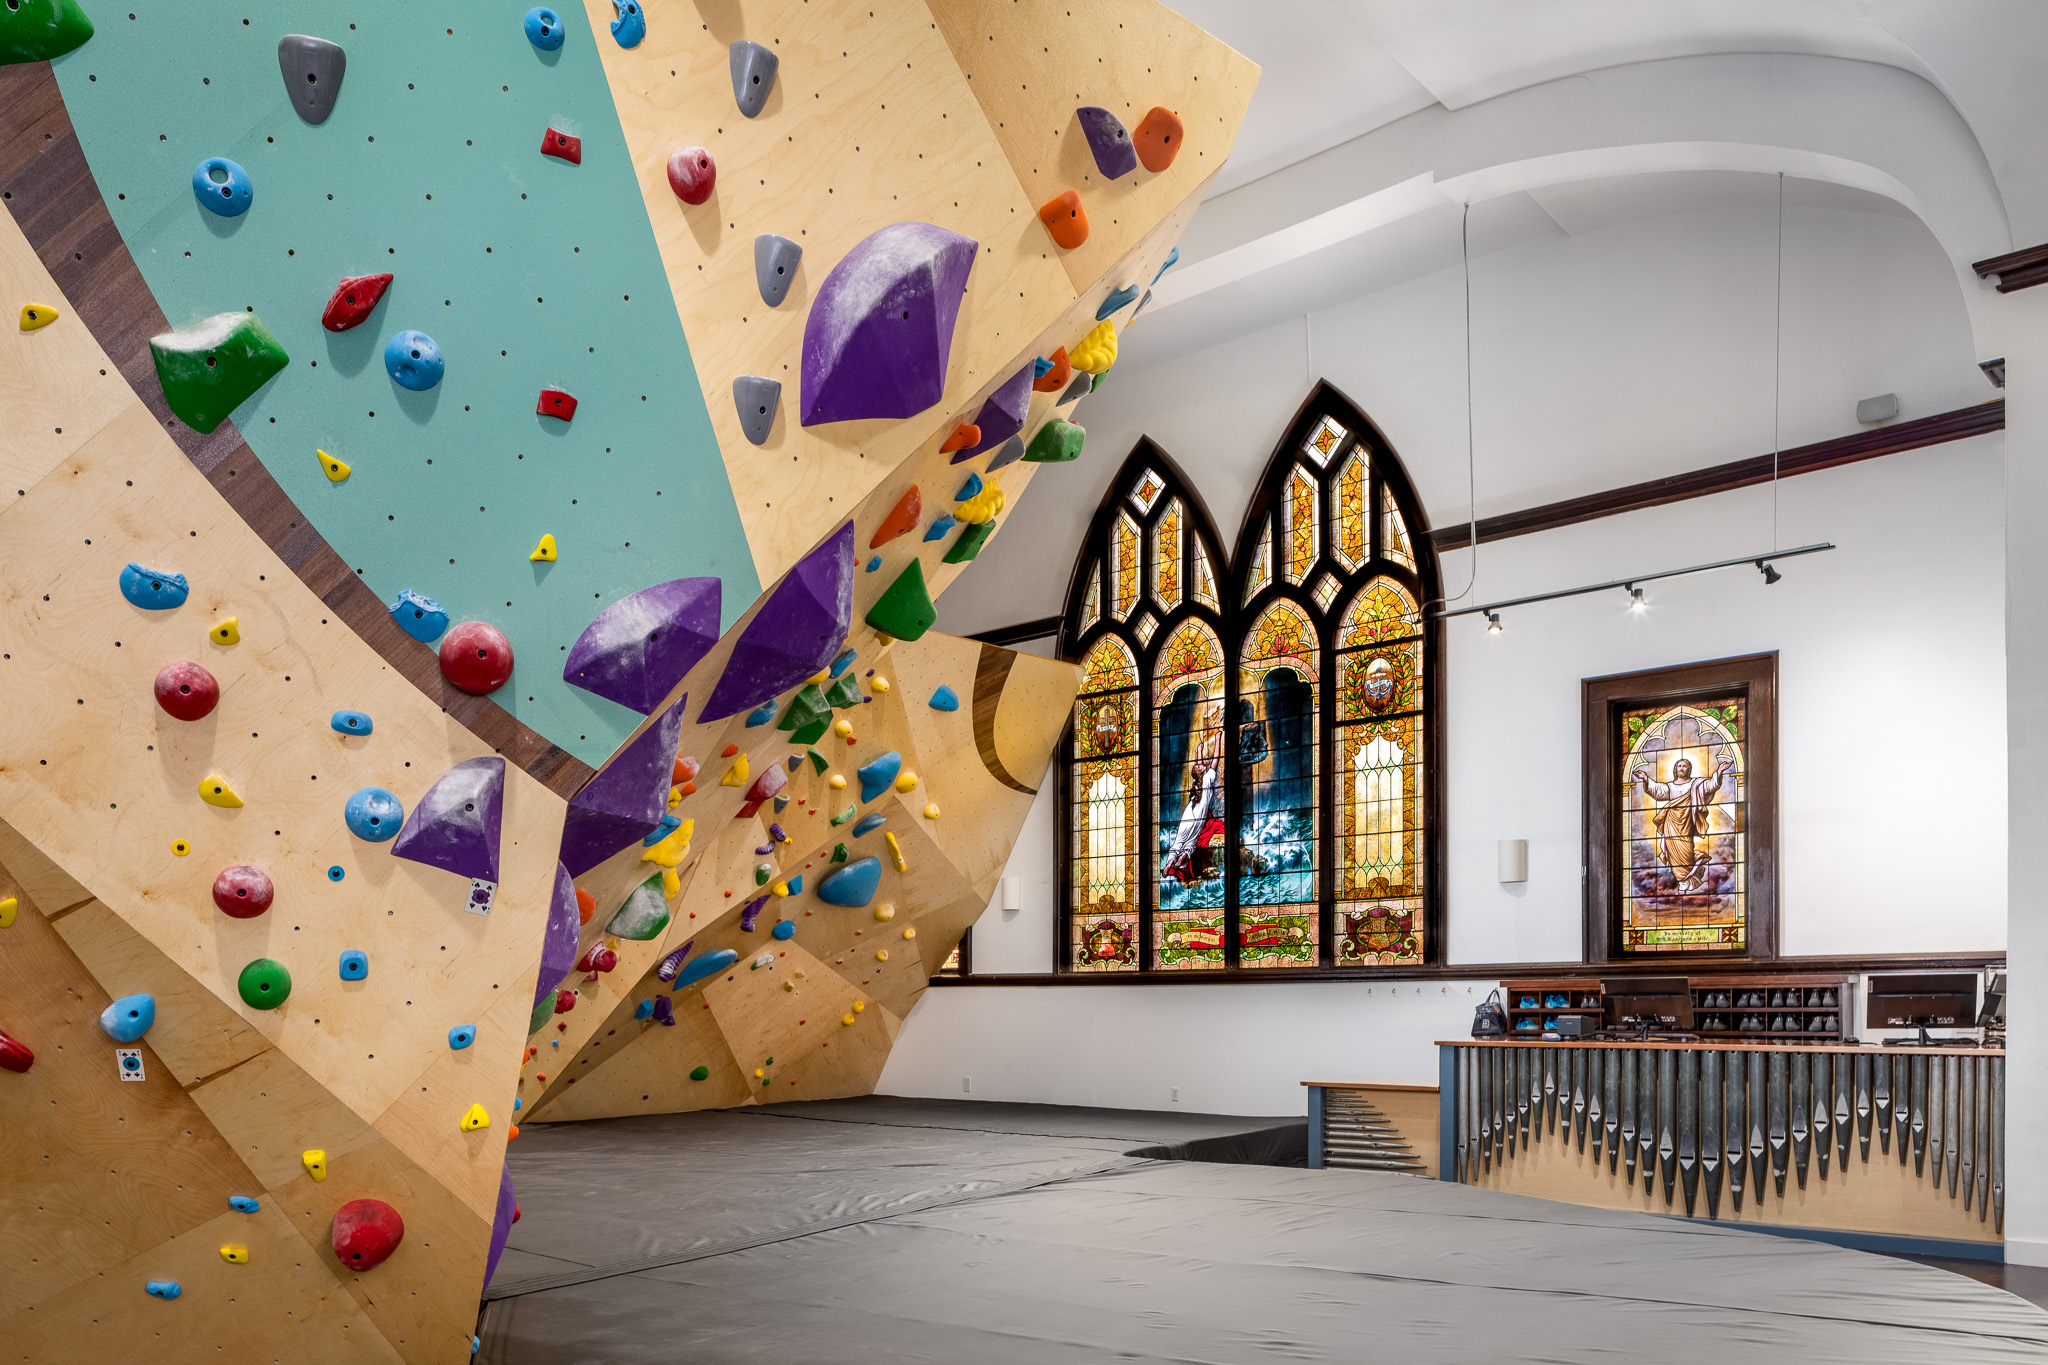 Climbing walls against the backdrop of a stained glass window.